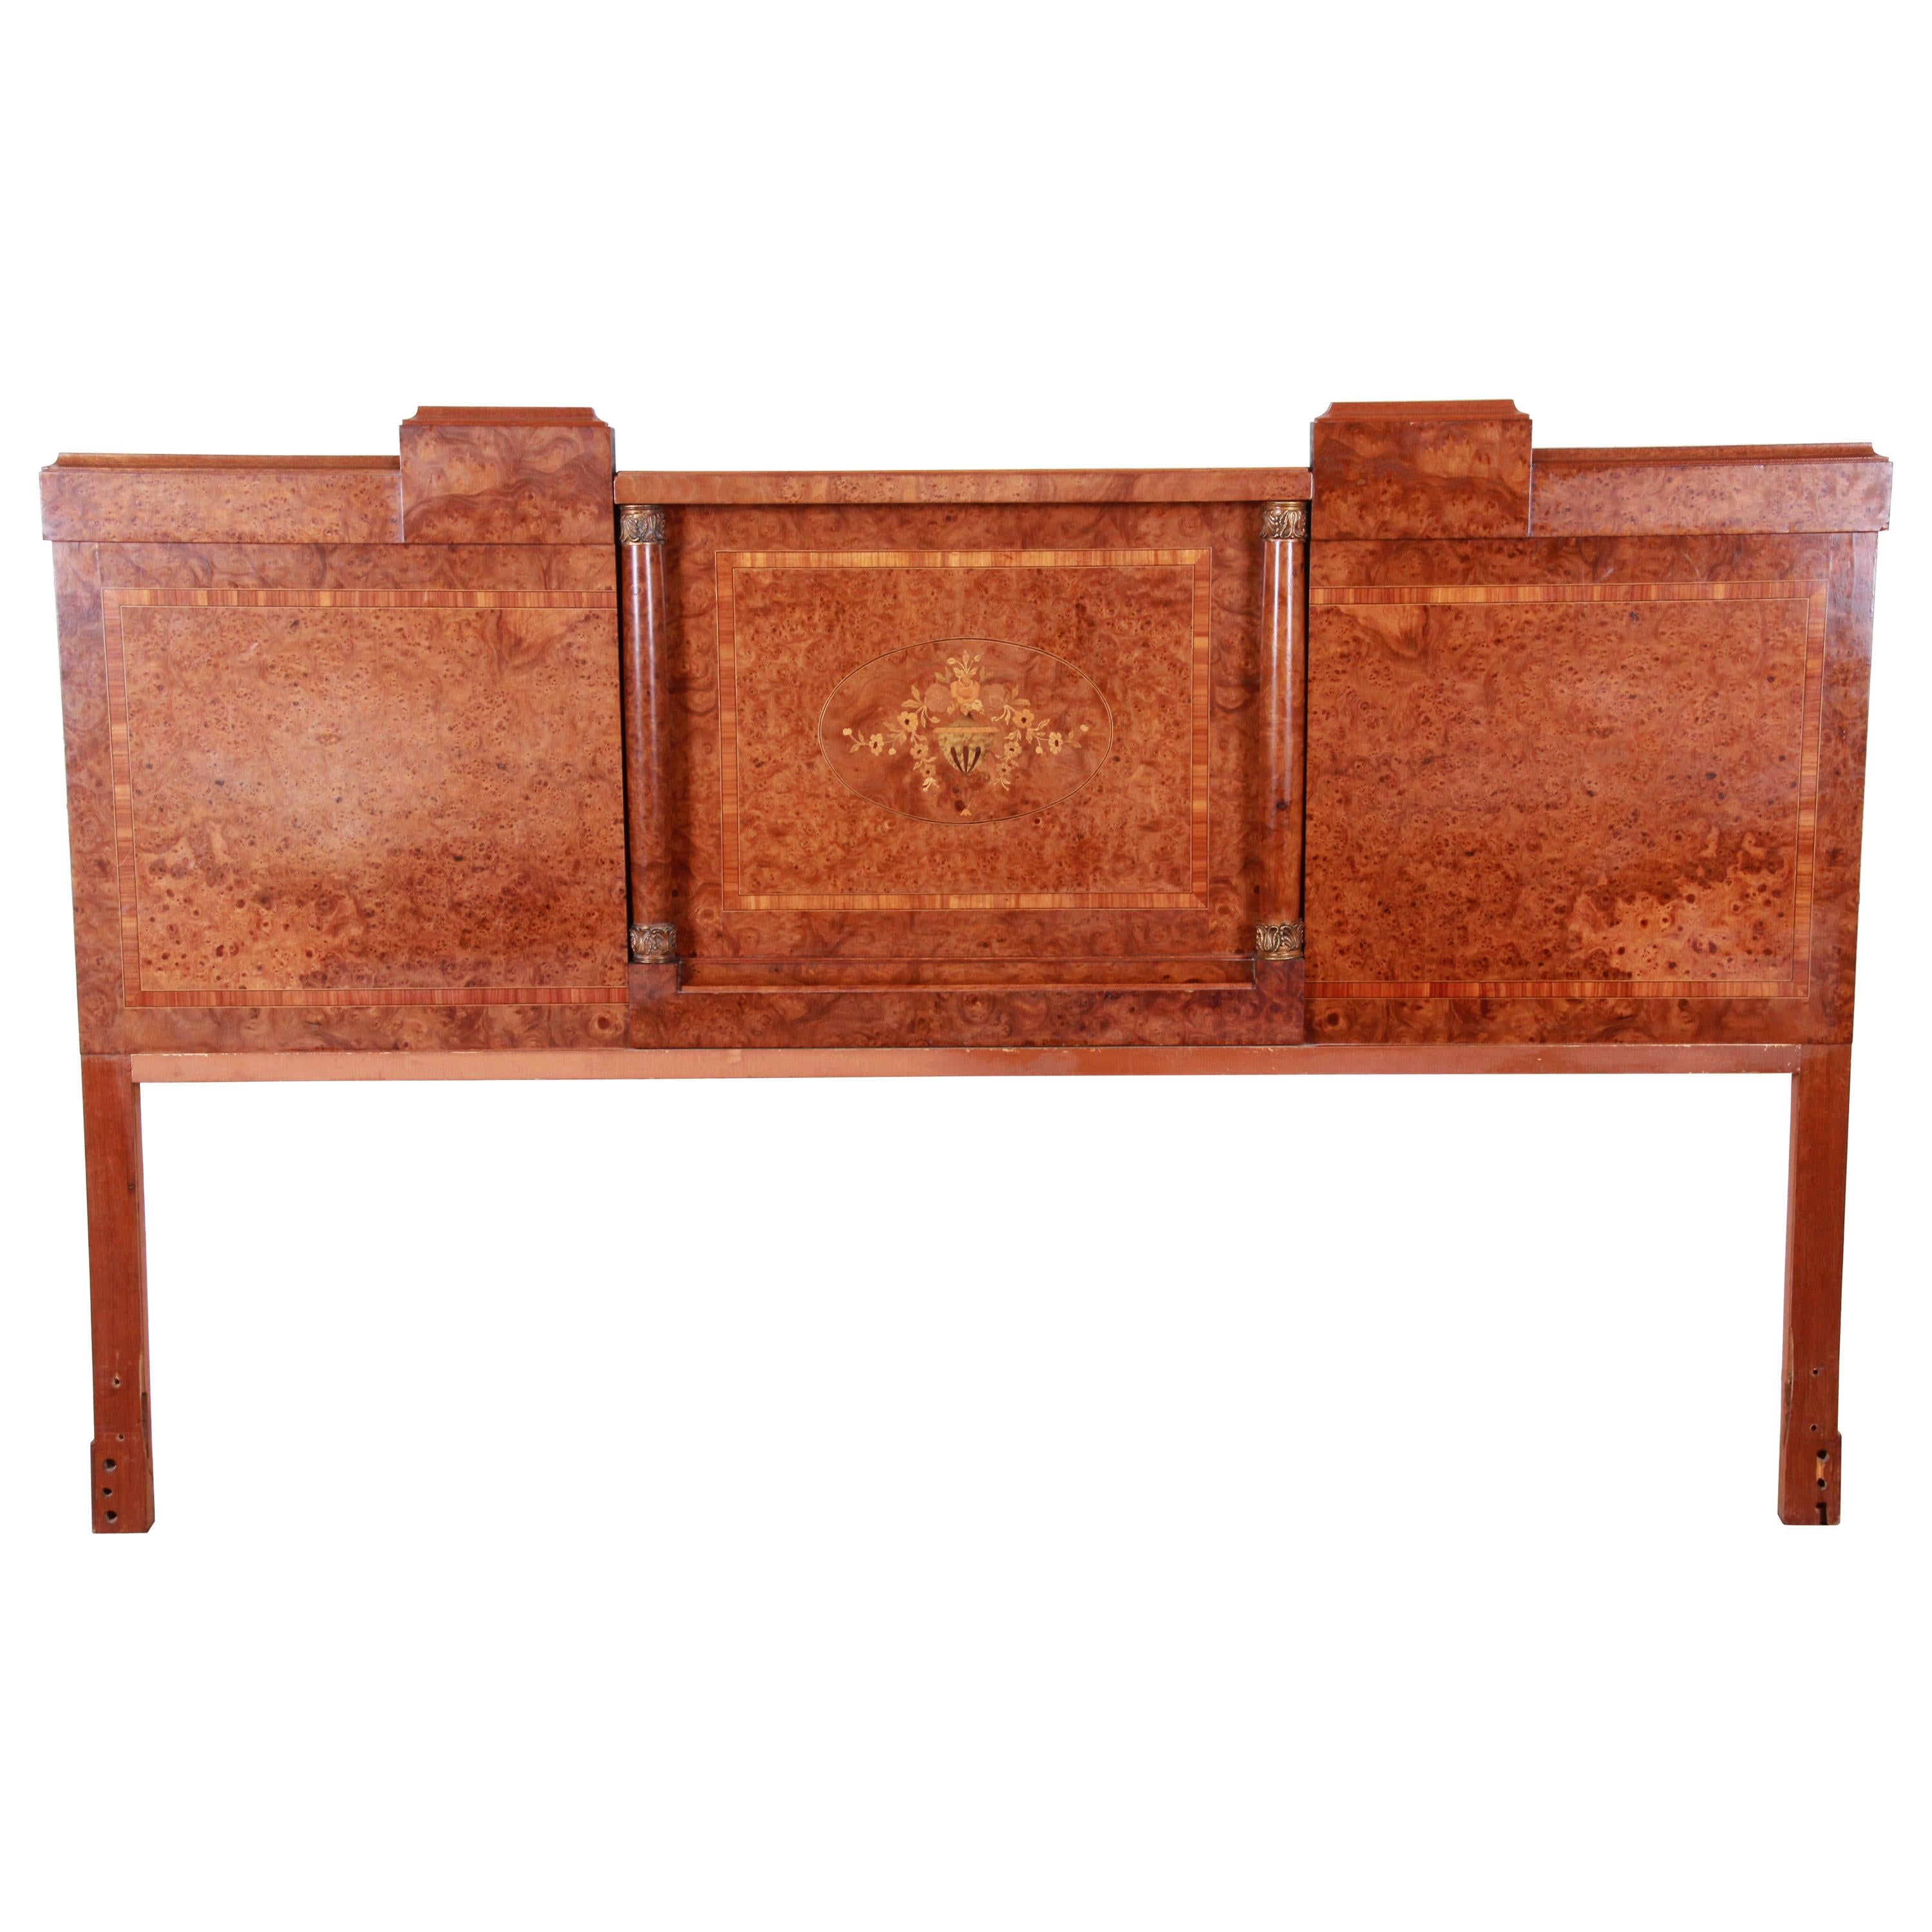 French Art Deco Burl Wood and Inlaid Marquetry King Headboard, circa 1930s